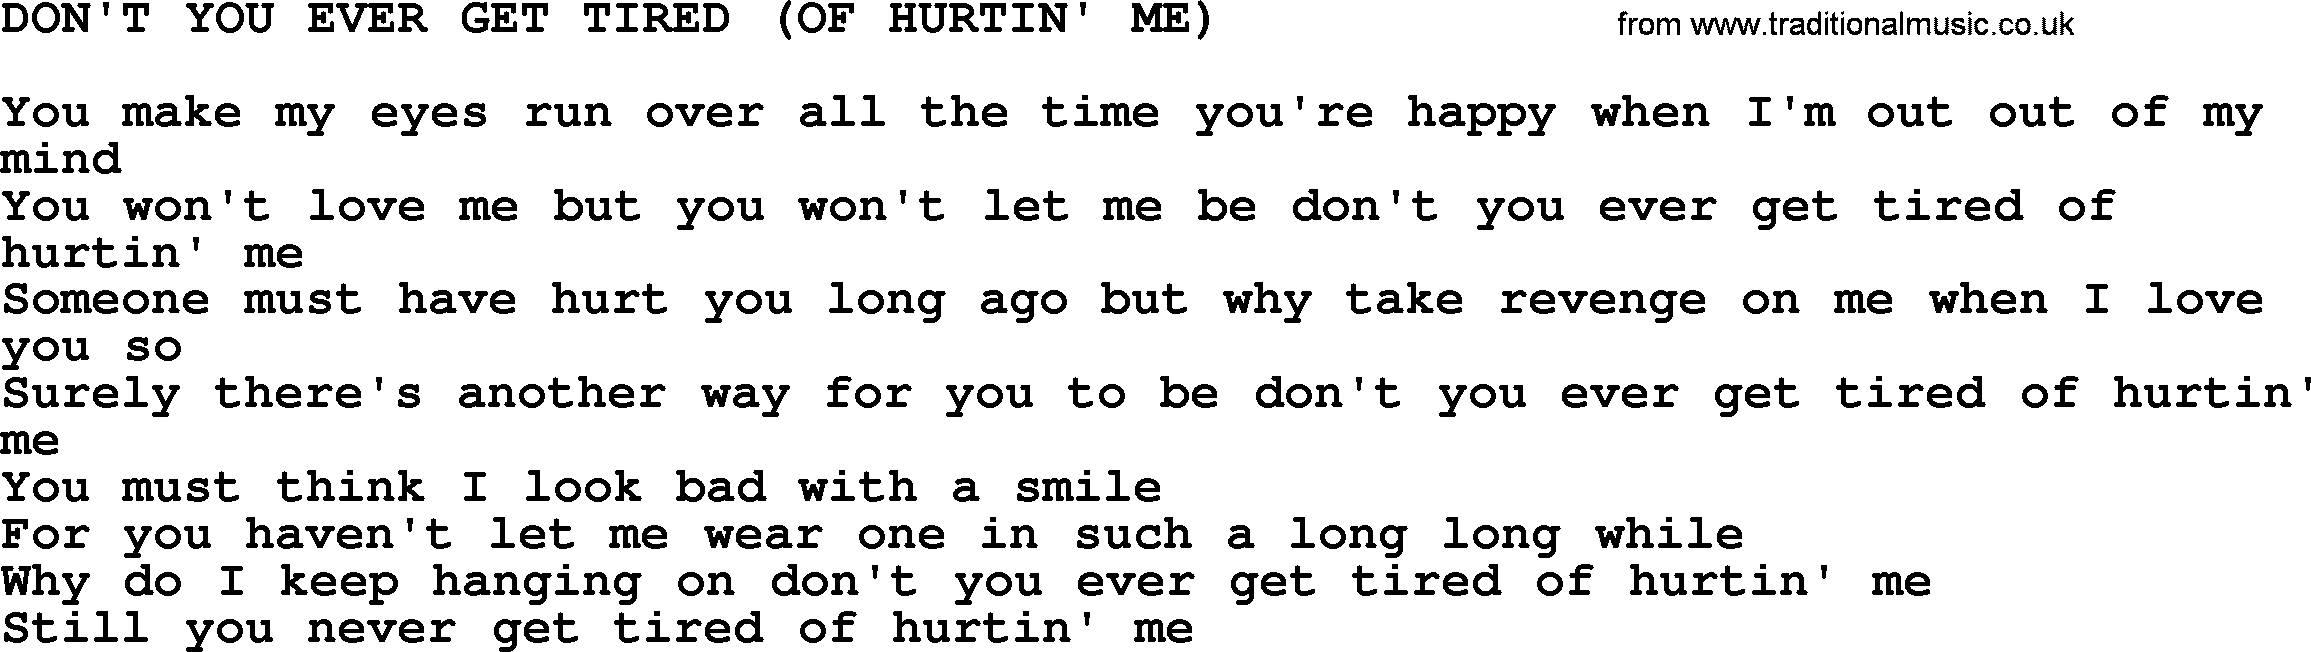 Merle Haggard song: Don't You Ever Get Tired Of Hurtin' Me, lyrics.